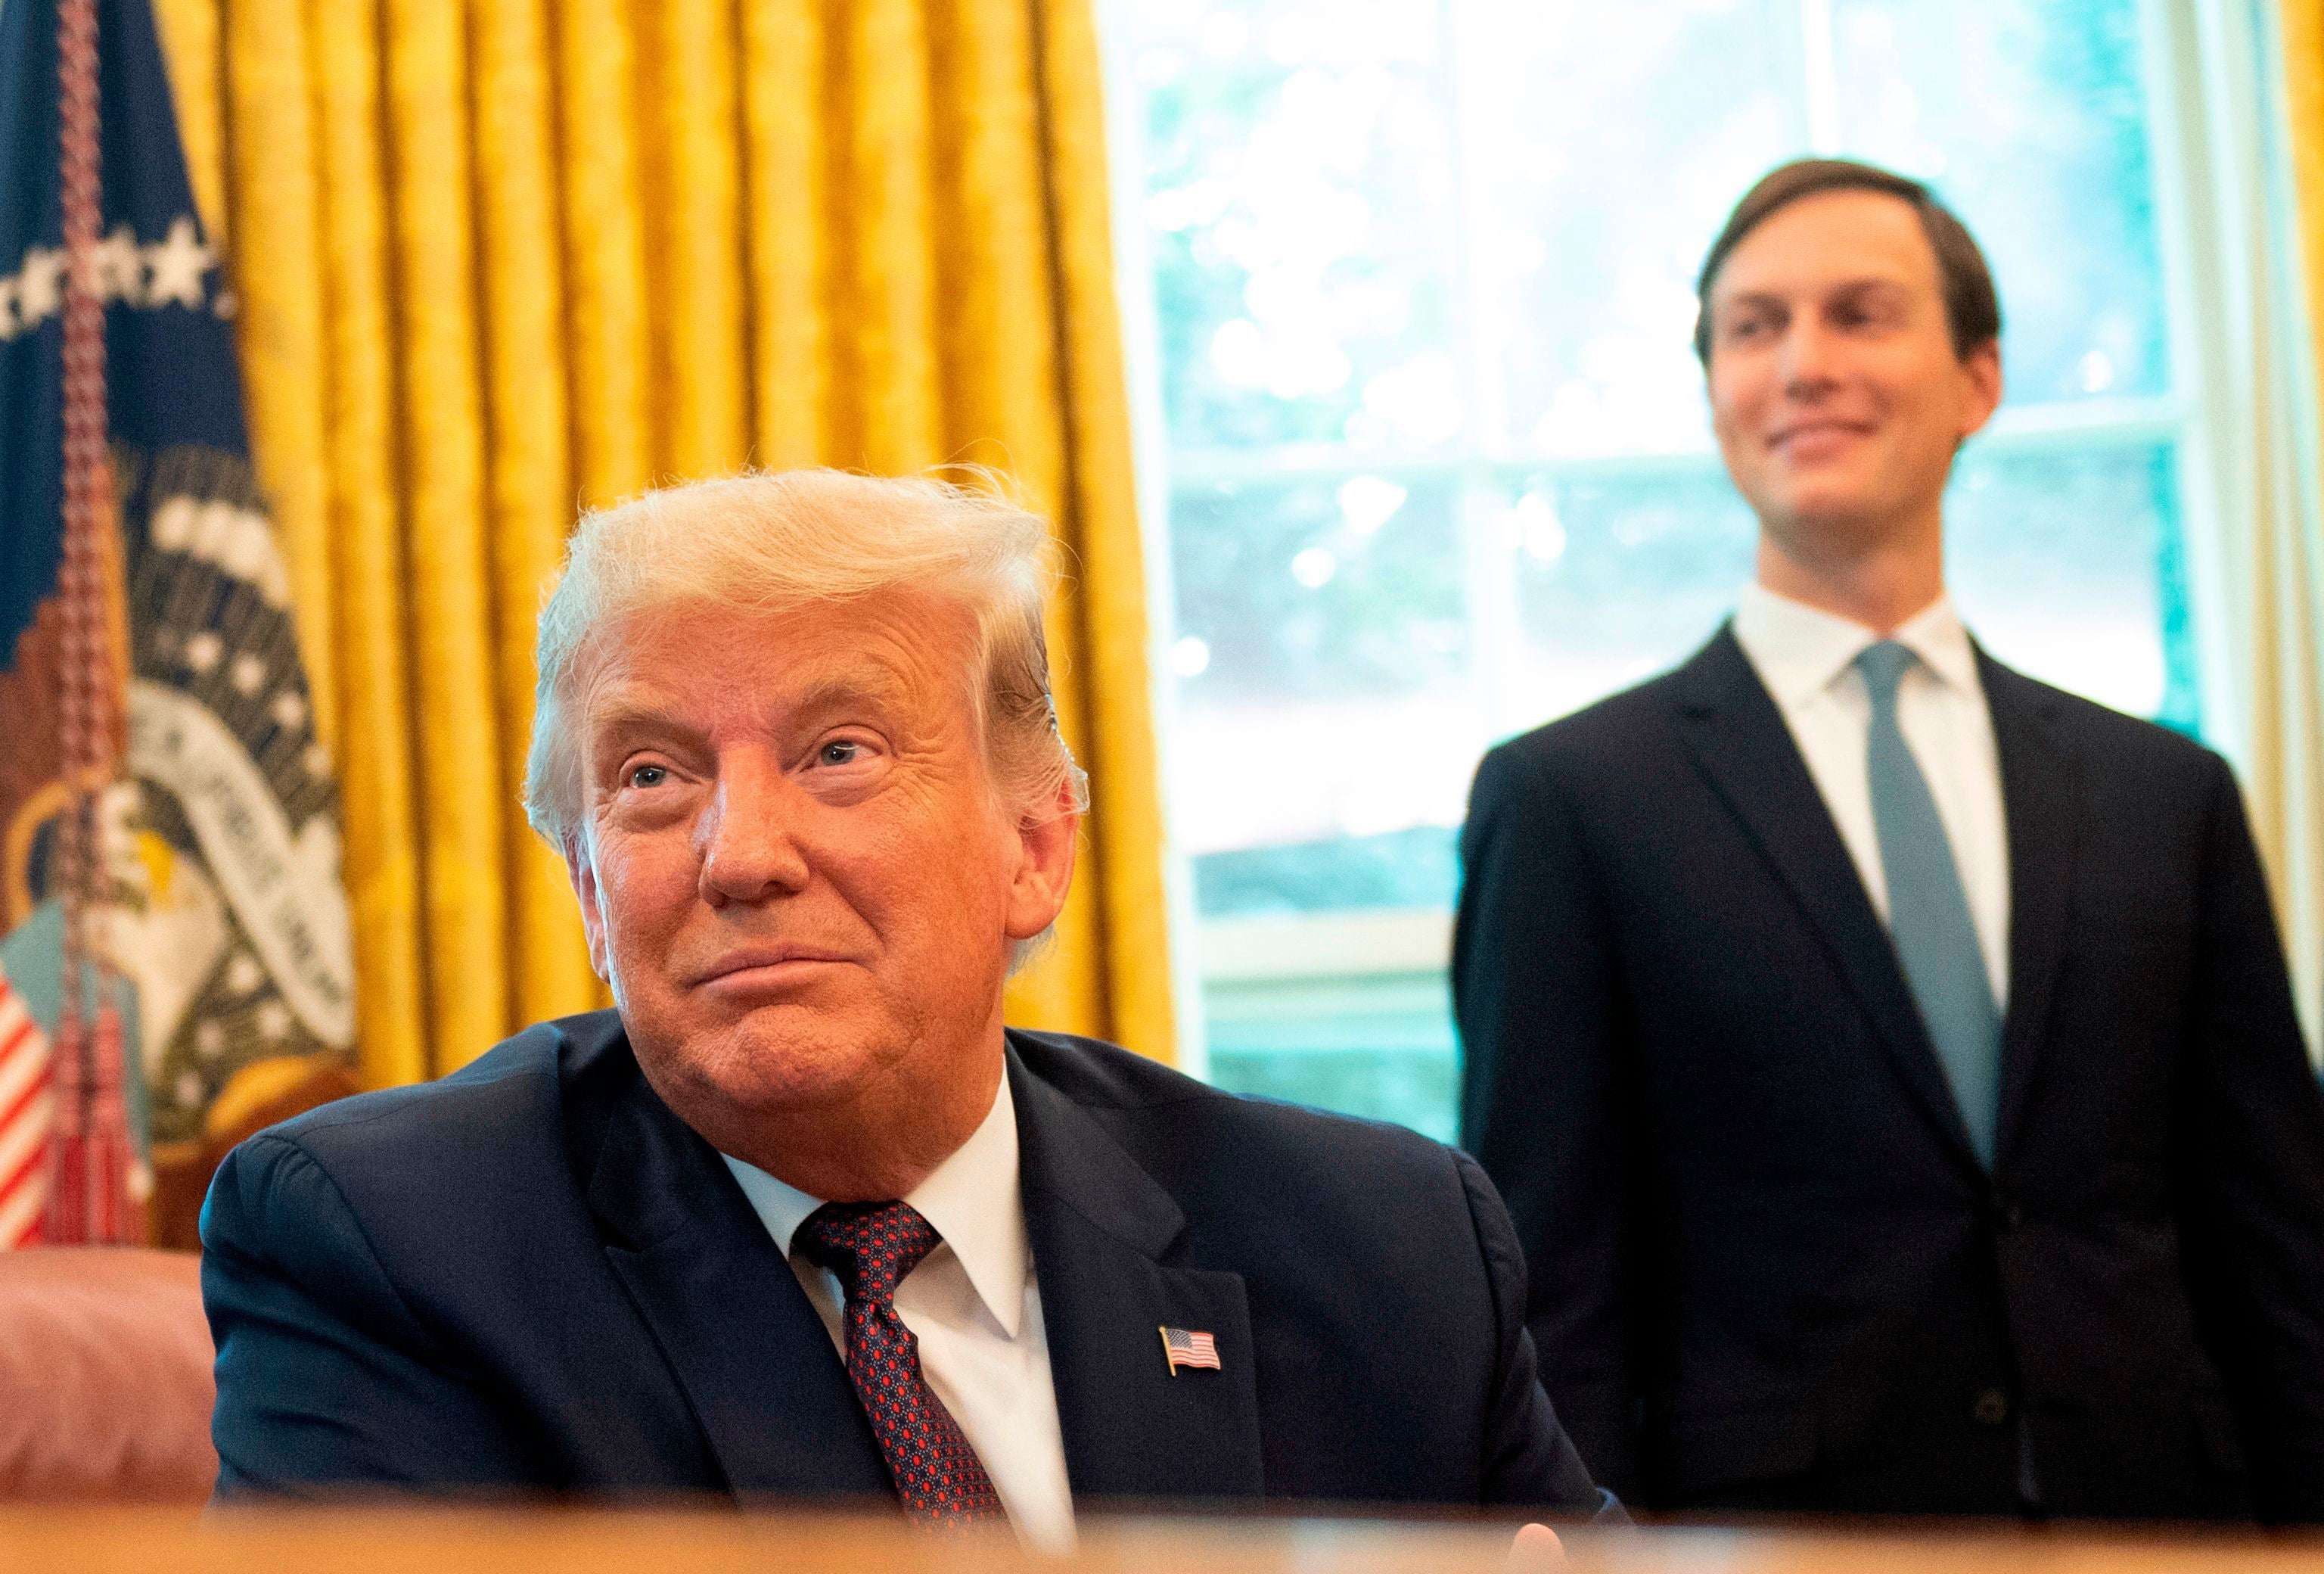 image for Donald Trump and Jared Kushner receive $3.65m in PPP loan money intended for small businesses, report says